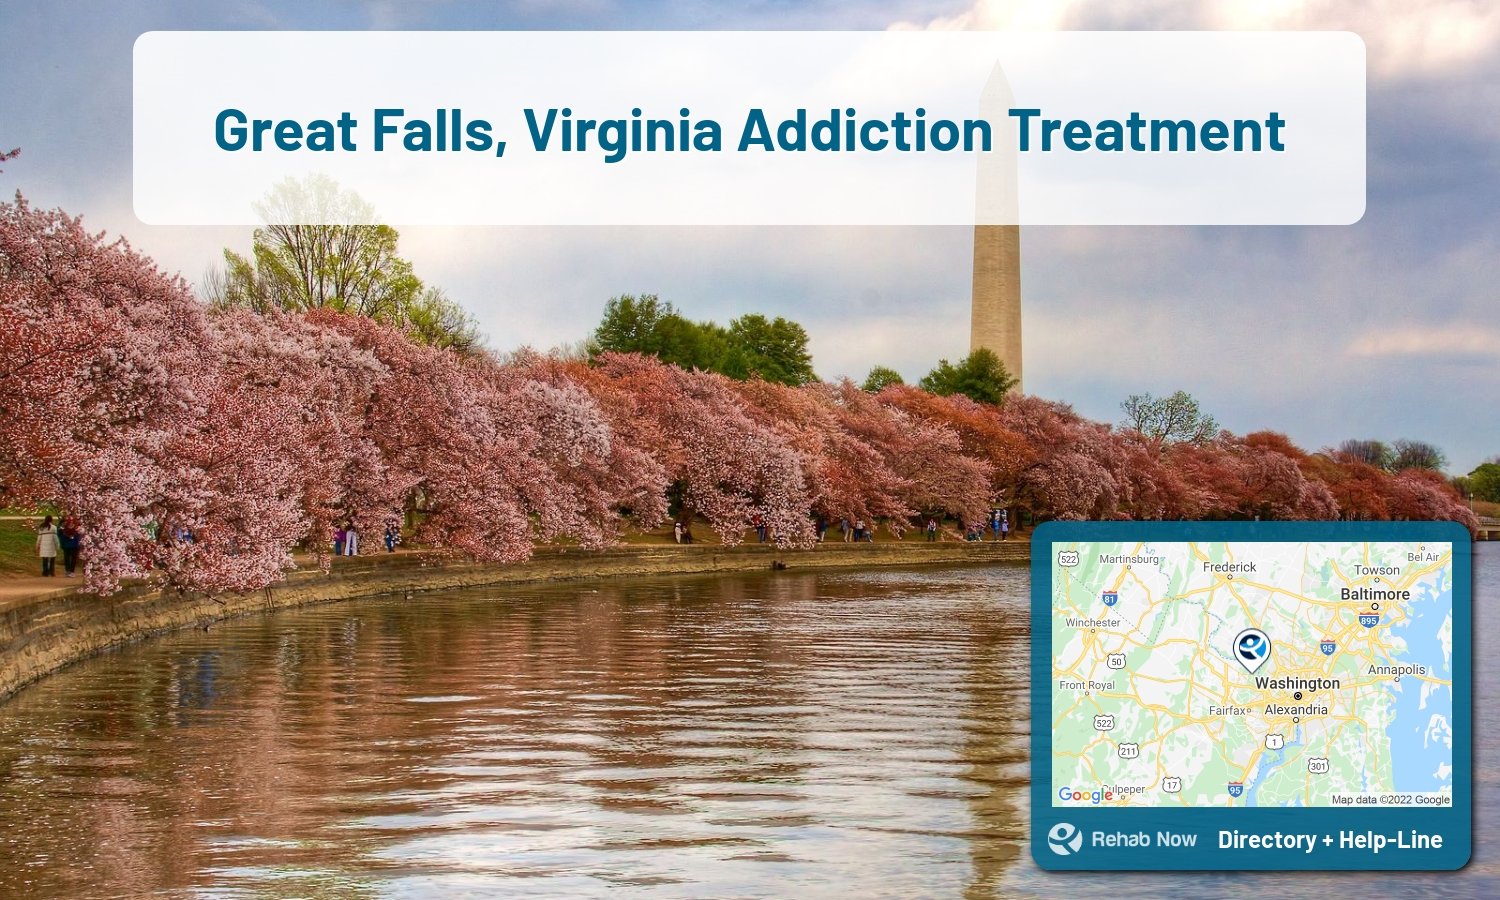 Drug rehab and alcohol treatment services nearby Great Falls, VA. Need help choosing a treatment program? Call our free hotline!